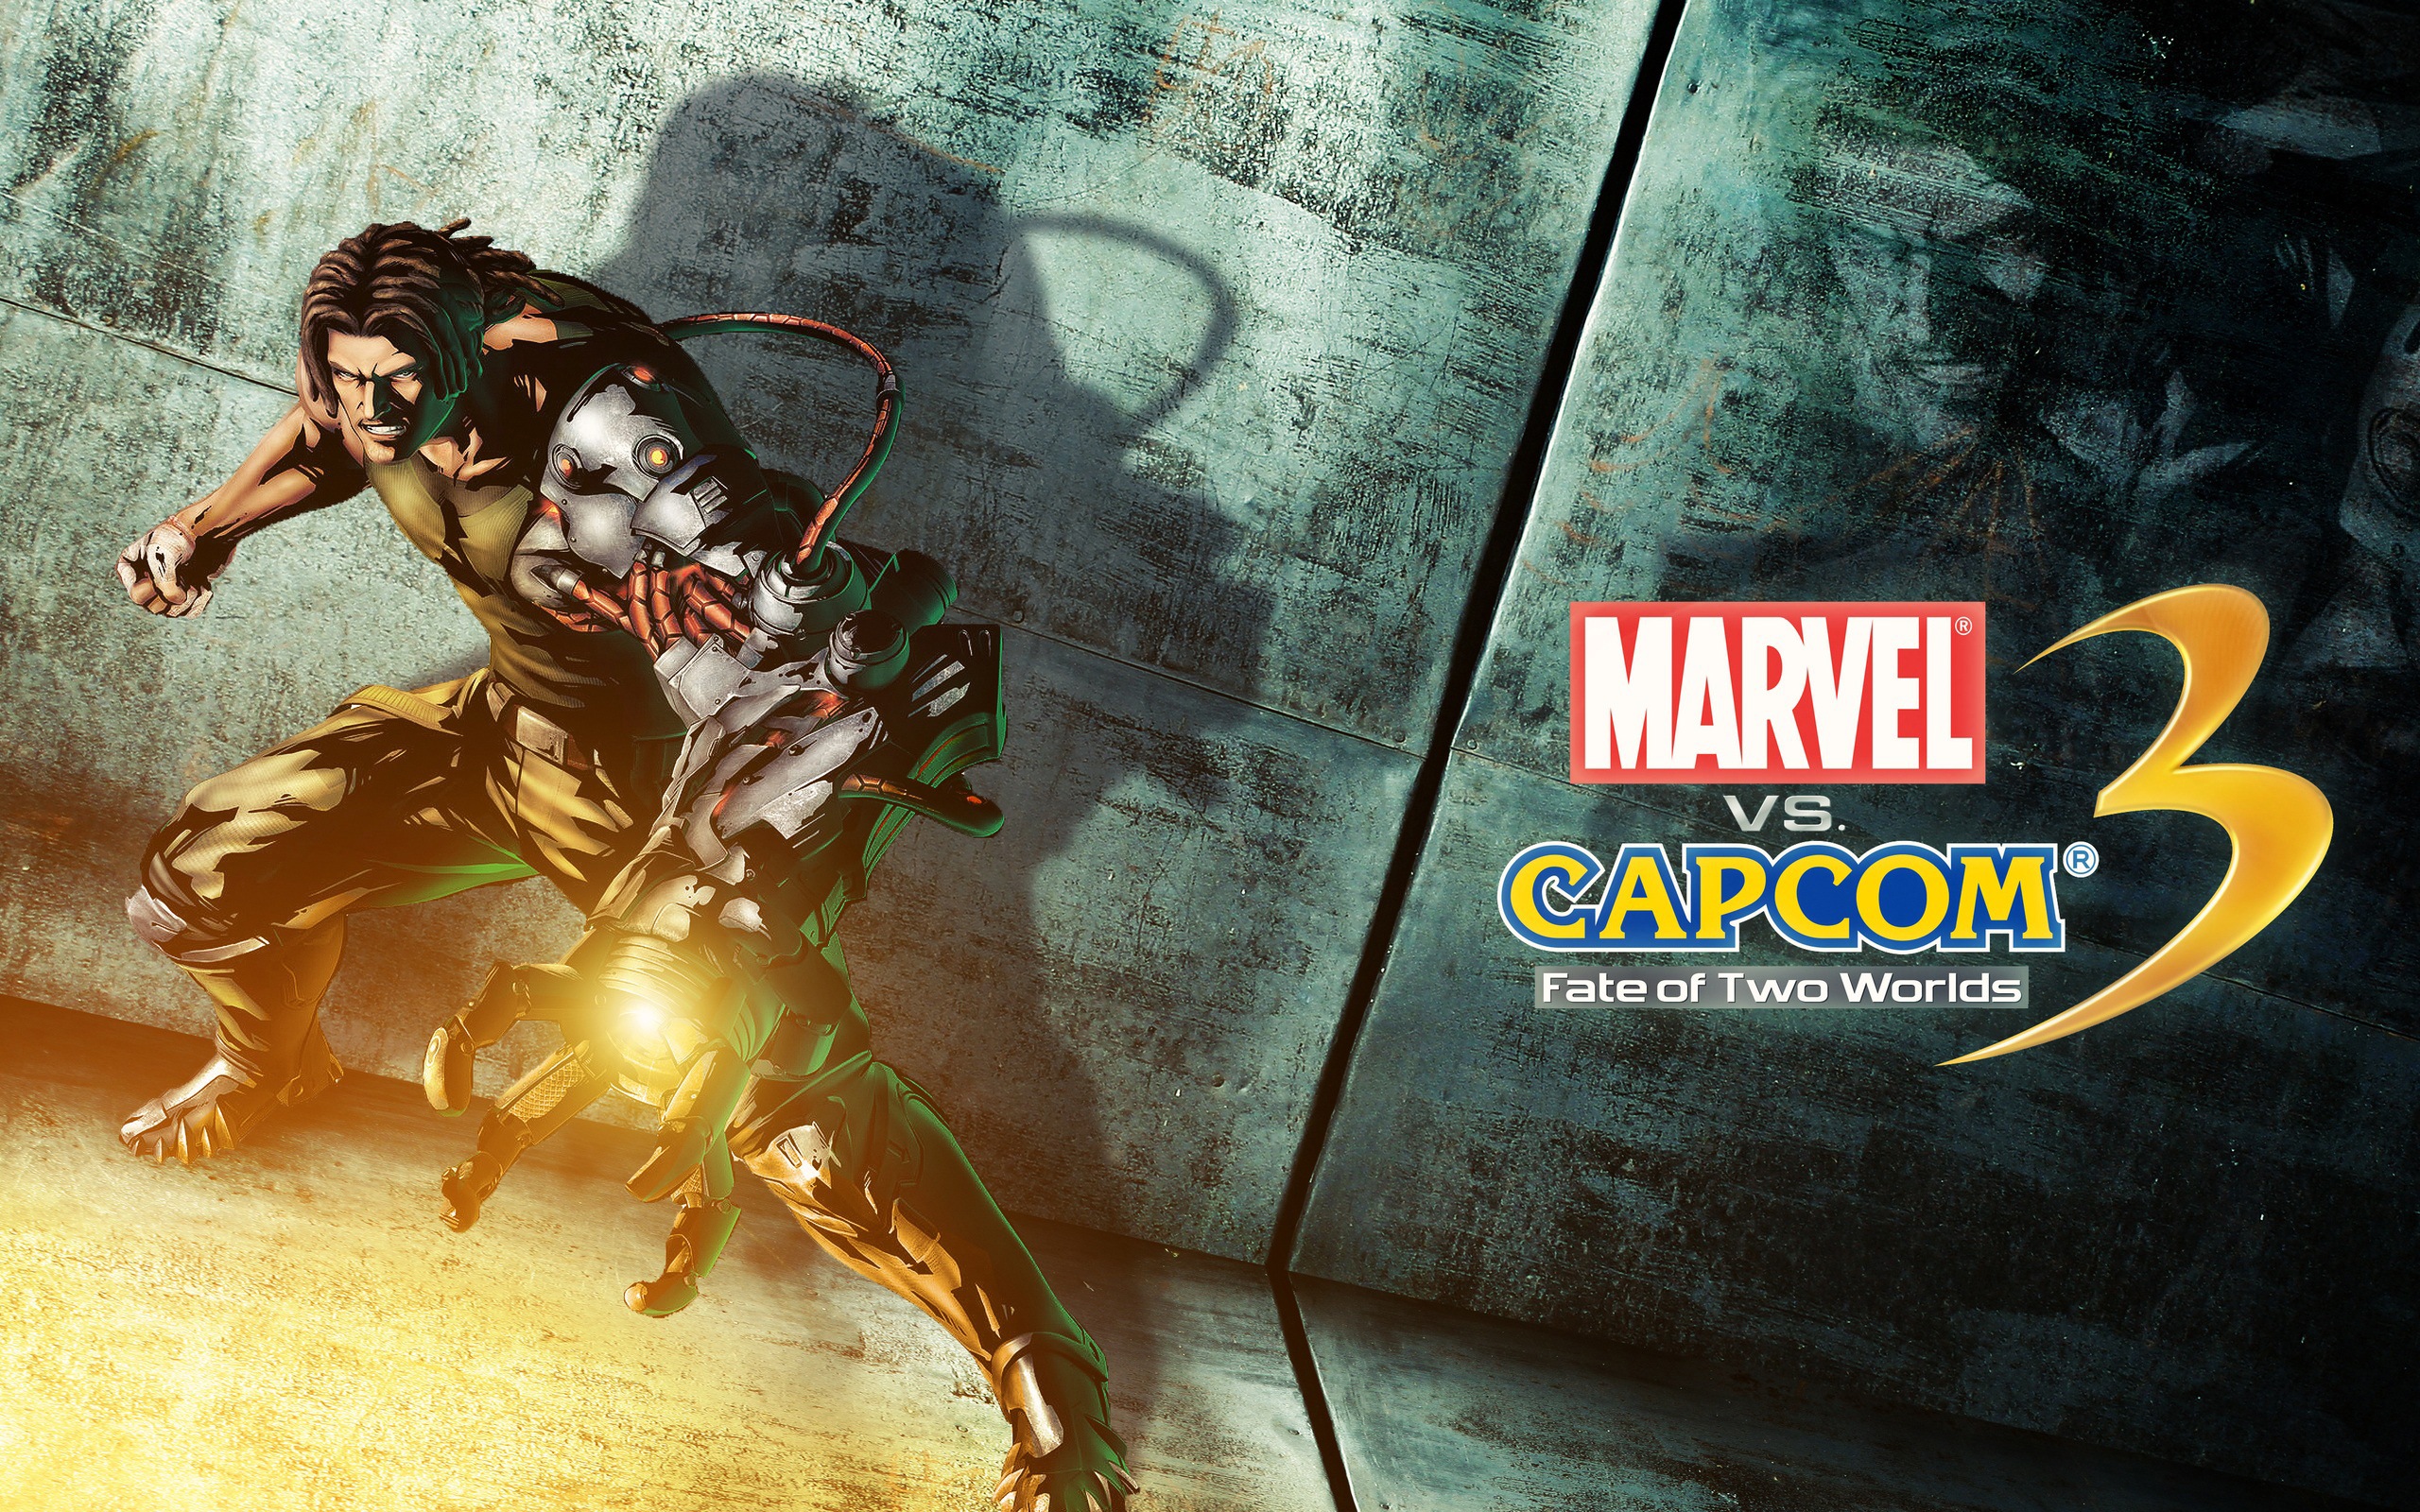 Marvel VS. Capcom 3: Fate of Two Worlds HD game wallpapers #8 - 2560x1600